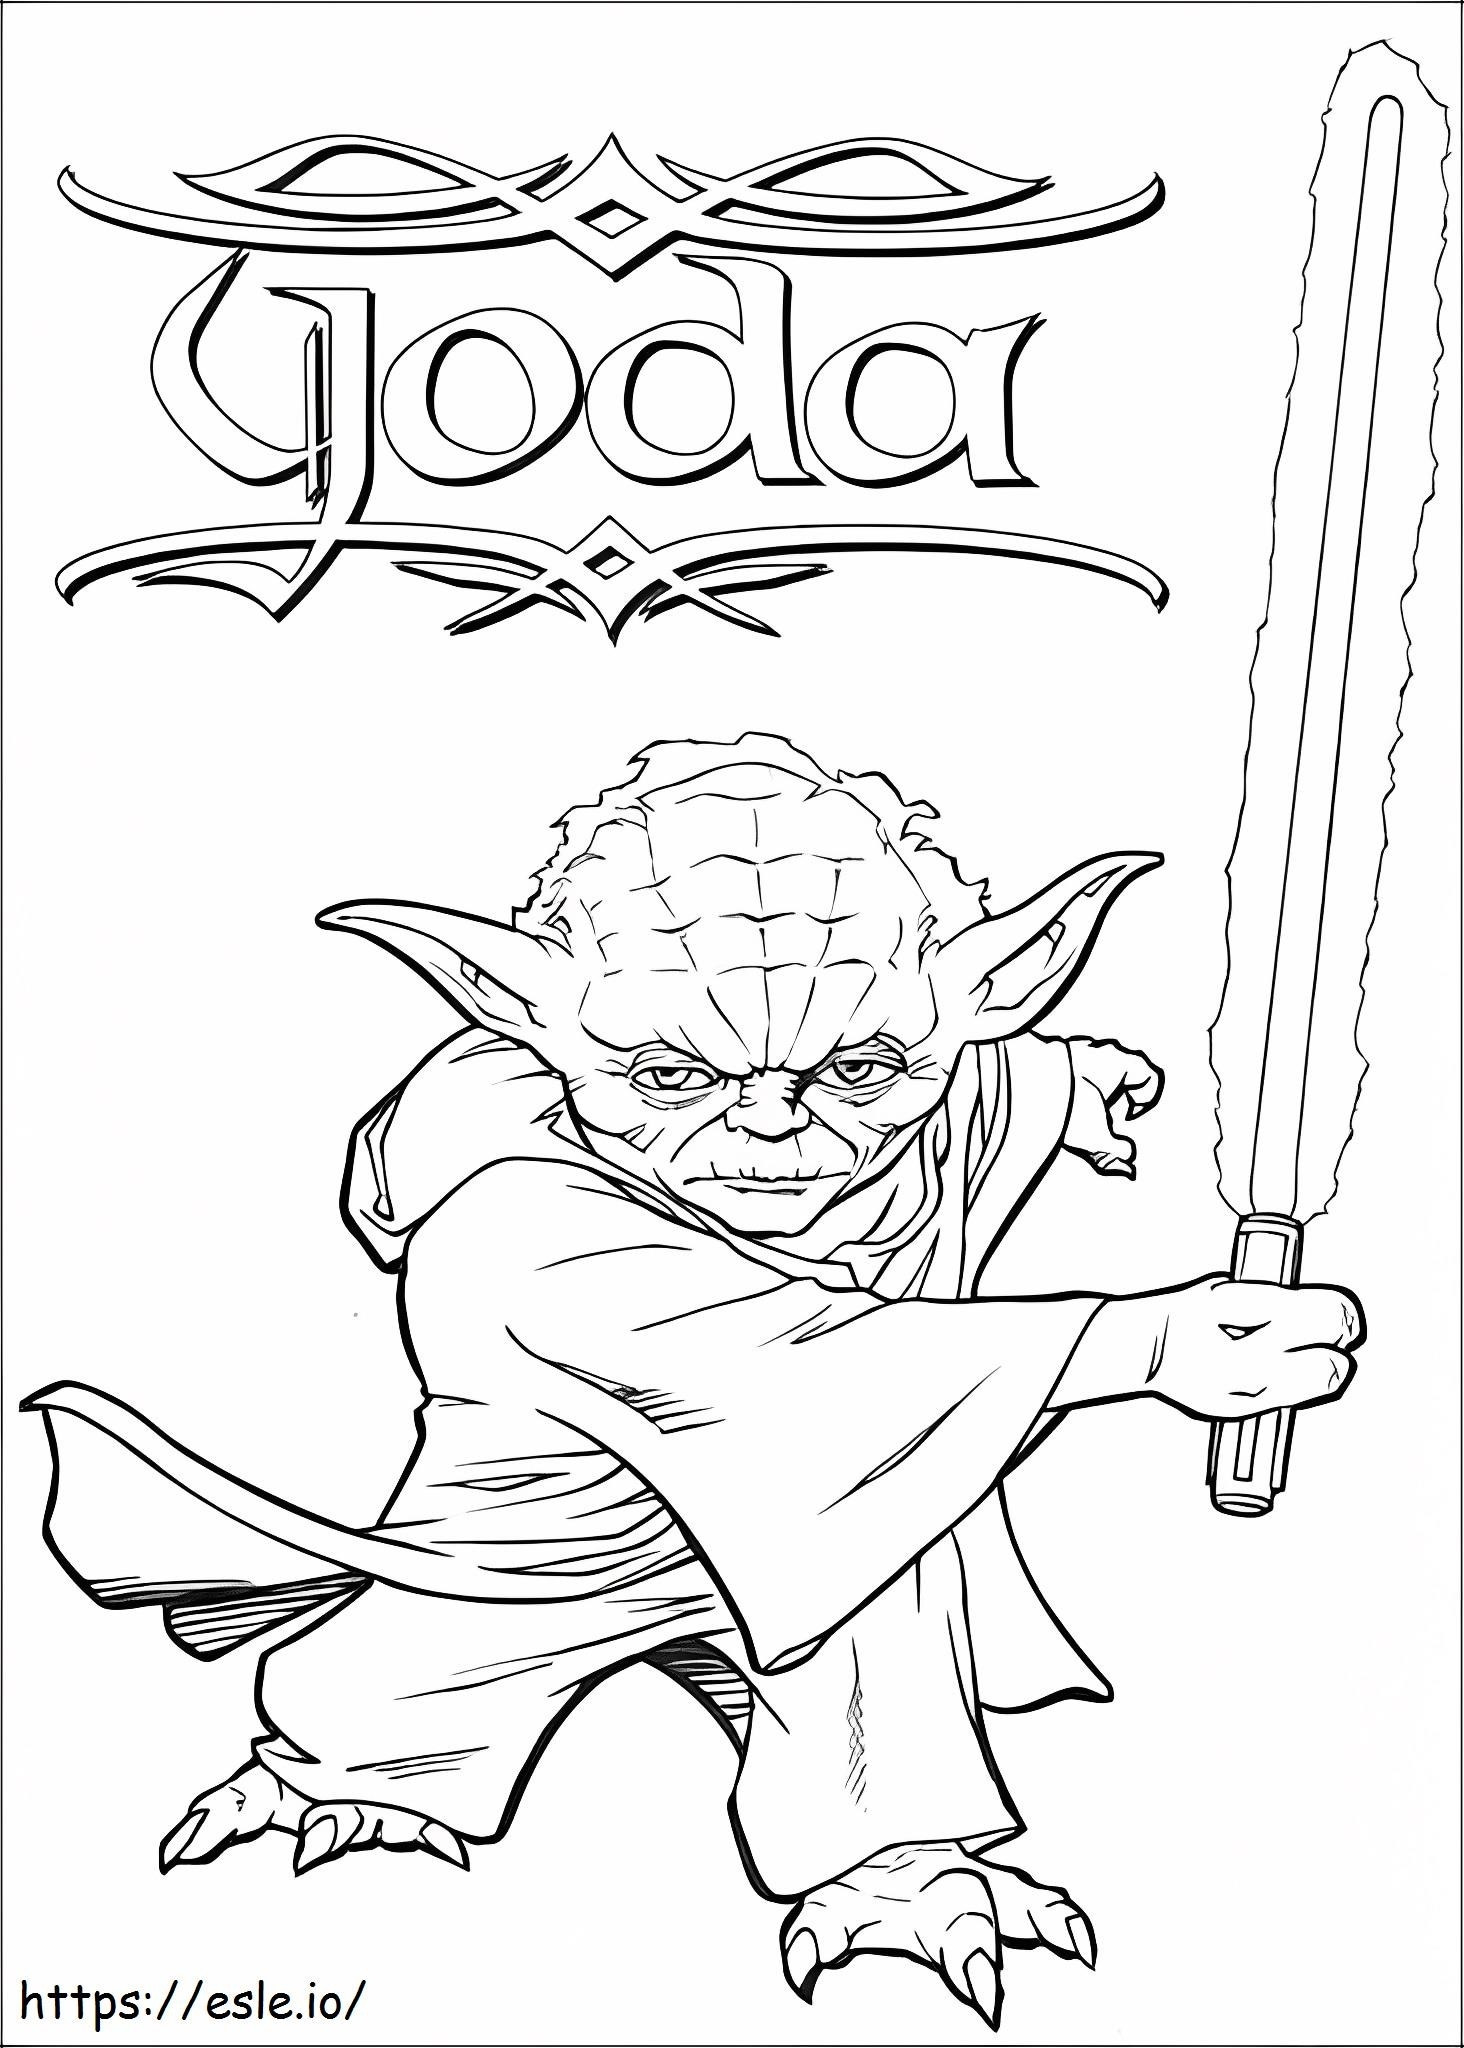 Master Yoda Fighting coloring page